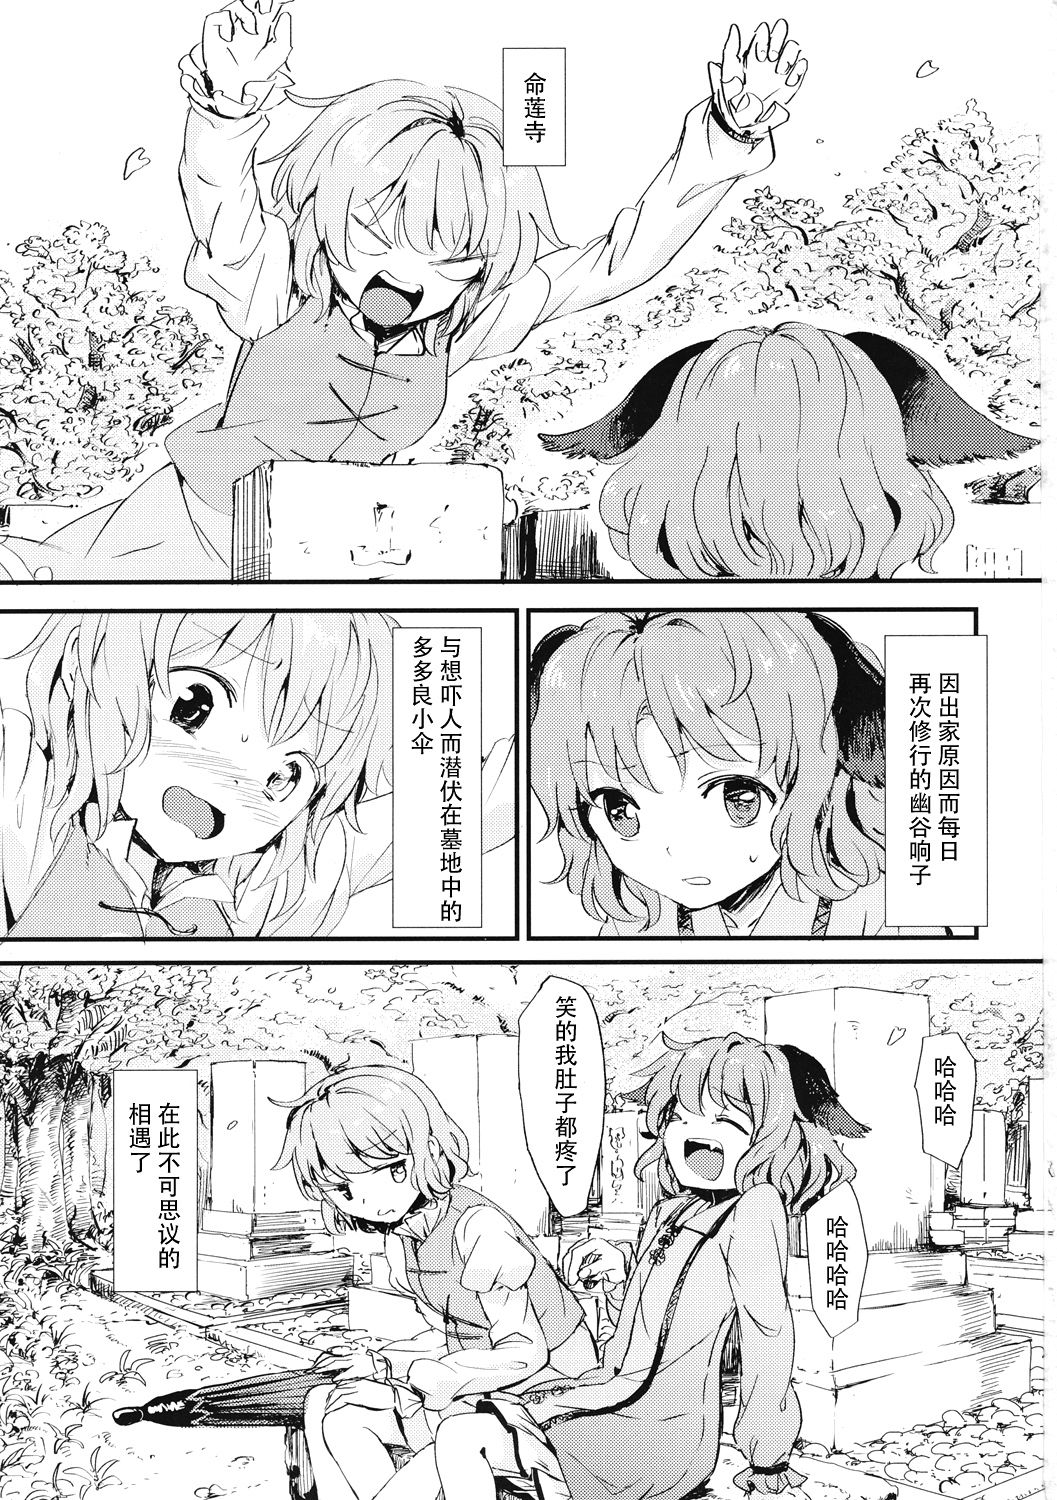 (C86) [Satei (s73d)] Kasa no miren (Touhou Project) [Chinese] [CE家族社] (C86) [砂亭 (s73d)] 傘の未練 (東方Project) [中文翻譯]